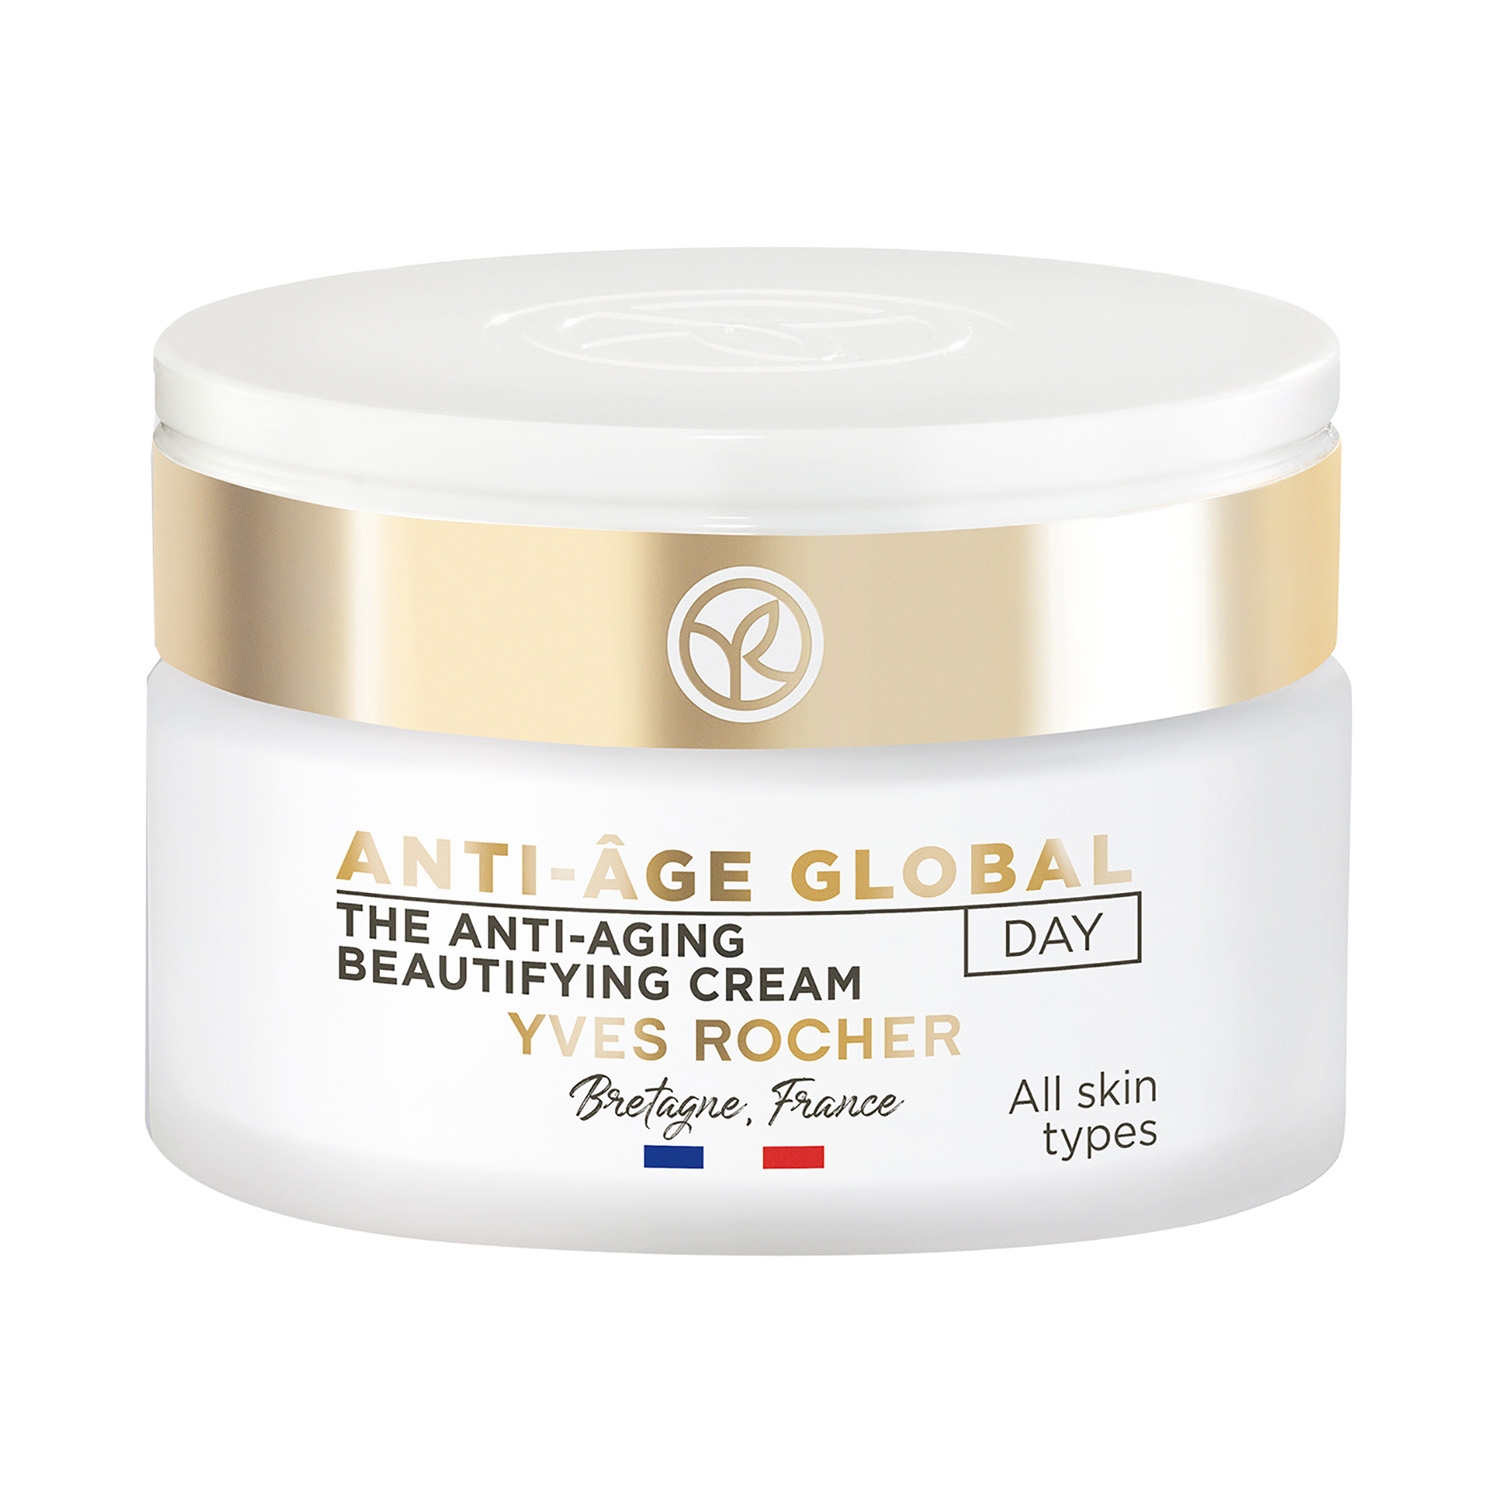 Yves Rocher | Yves Rocher Anti Age Global The Anti-Aging Beautifying Day Cream (50ml)